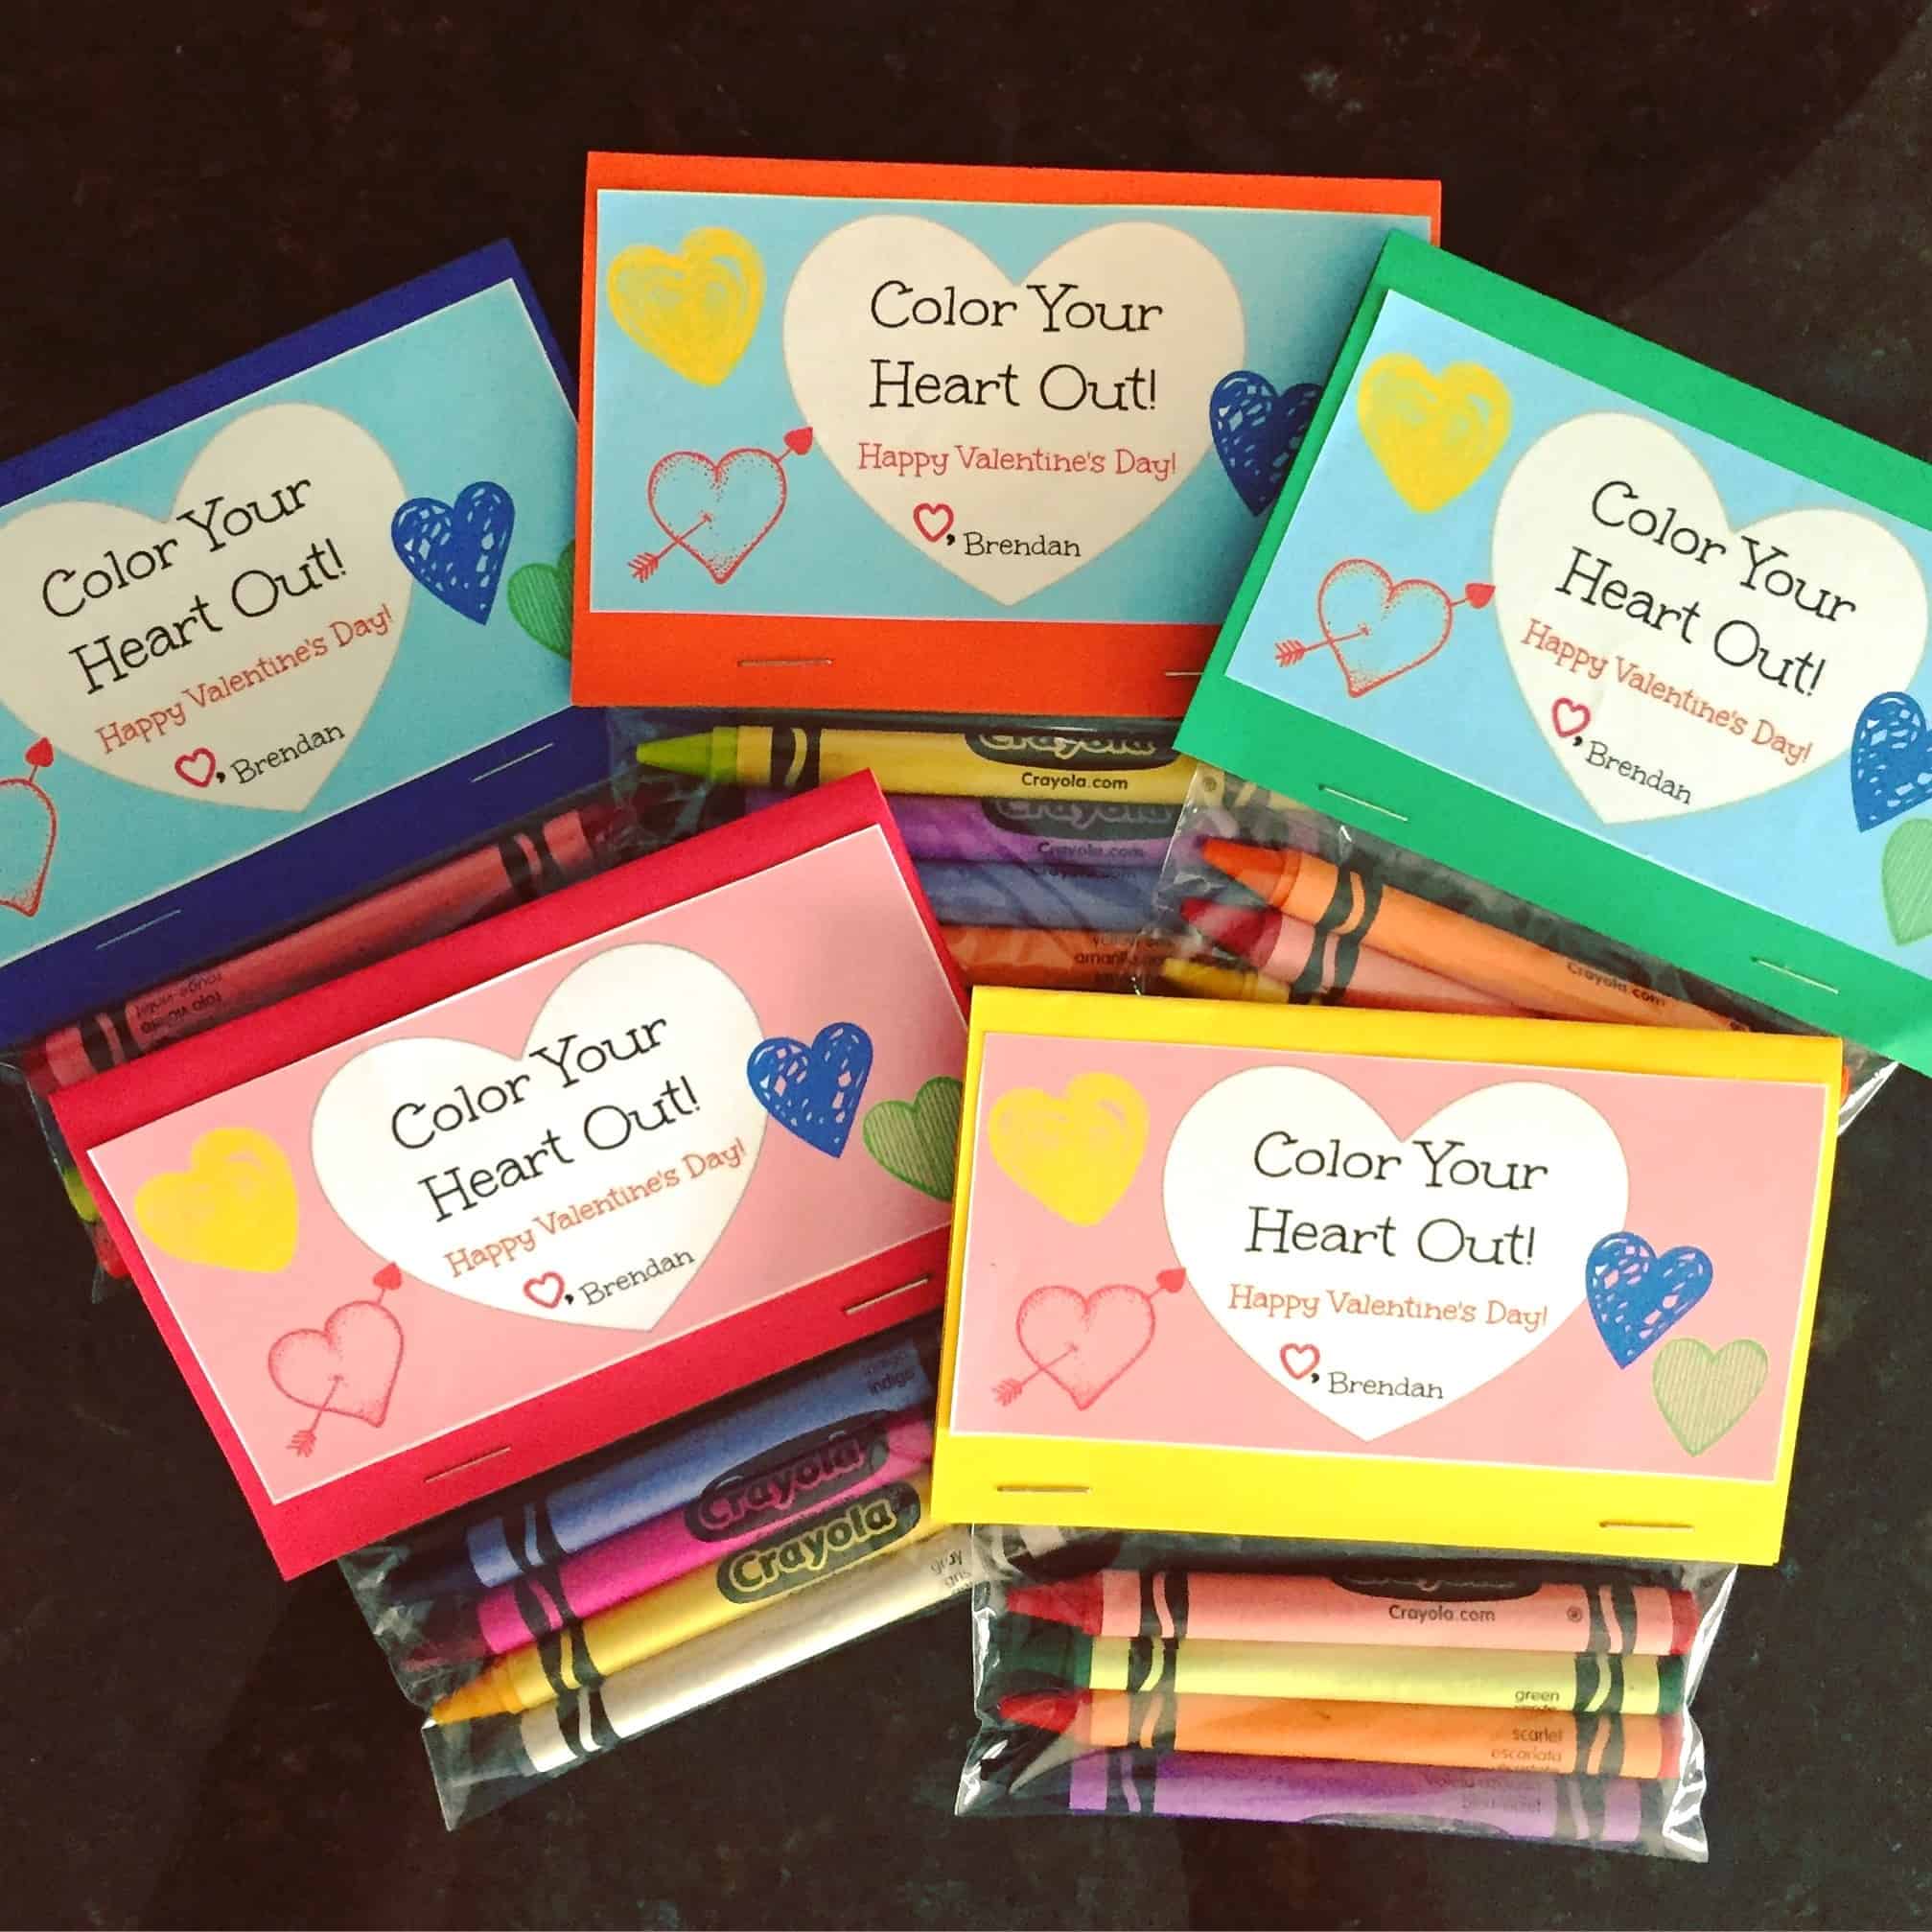 10 Ideas for Non-Candy Valentine's Day Cards